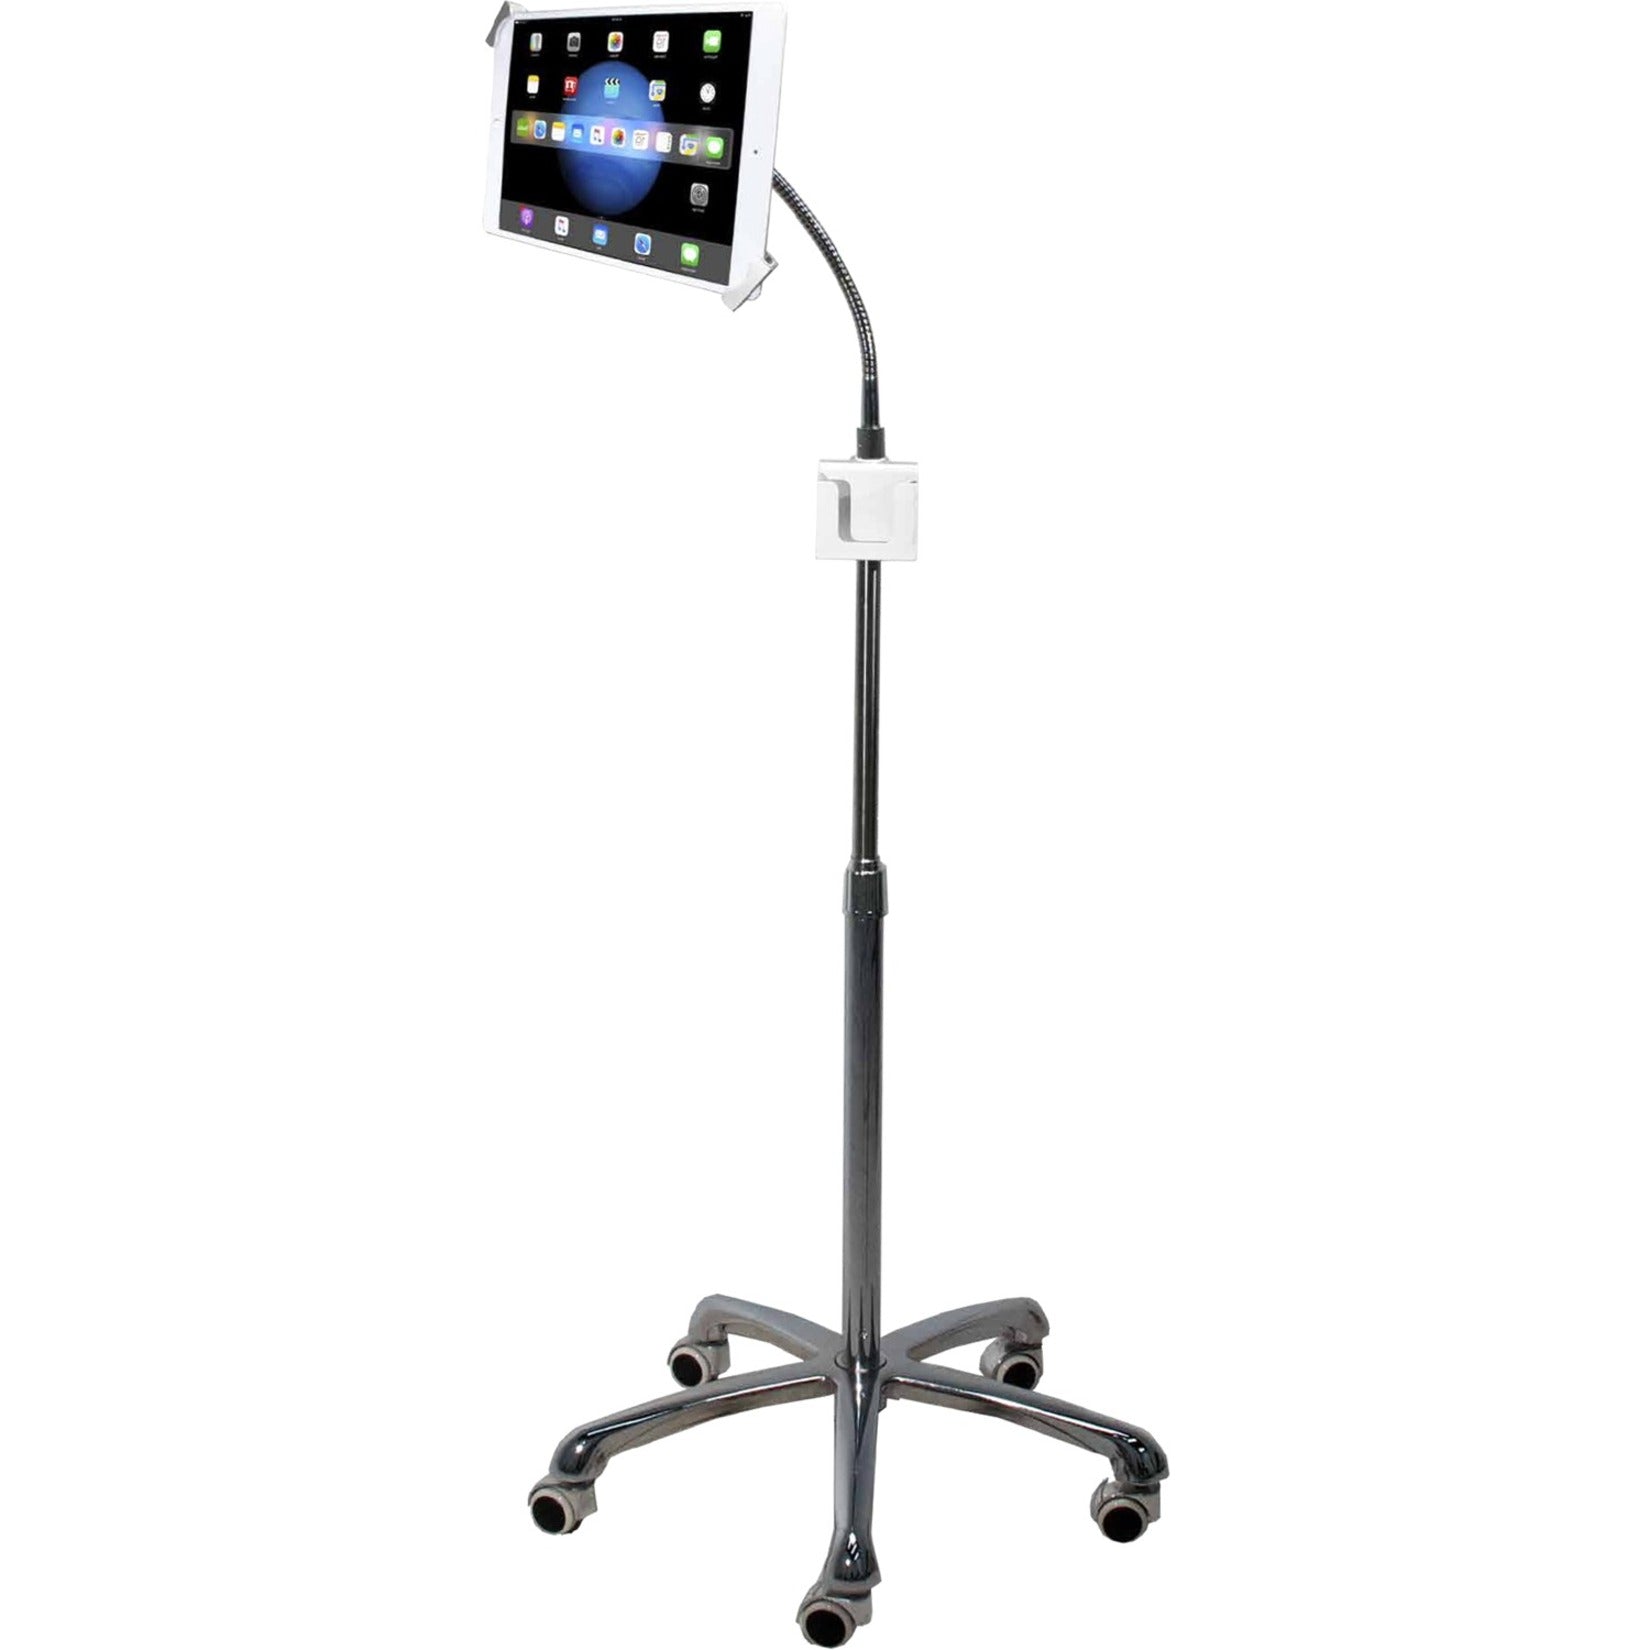 CTA Digital PAD-SHFS Heavy-Duty Security Gooseneck Stand 7-13" Inch Tablets, 360 Rotate